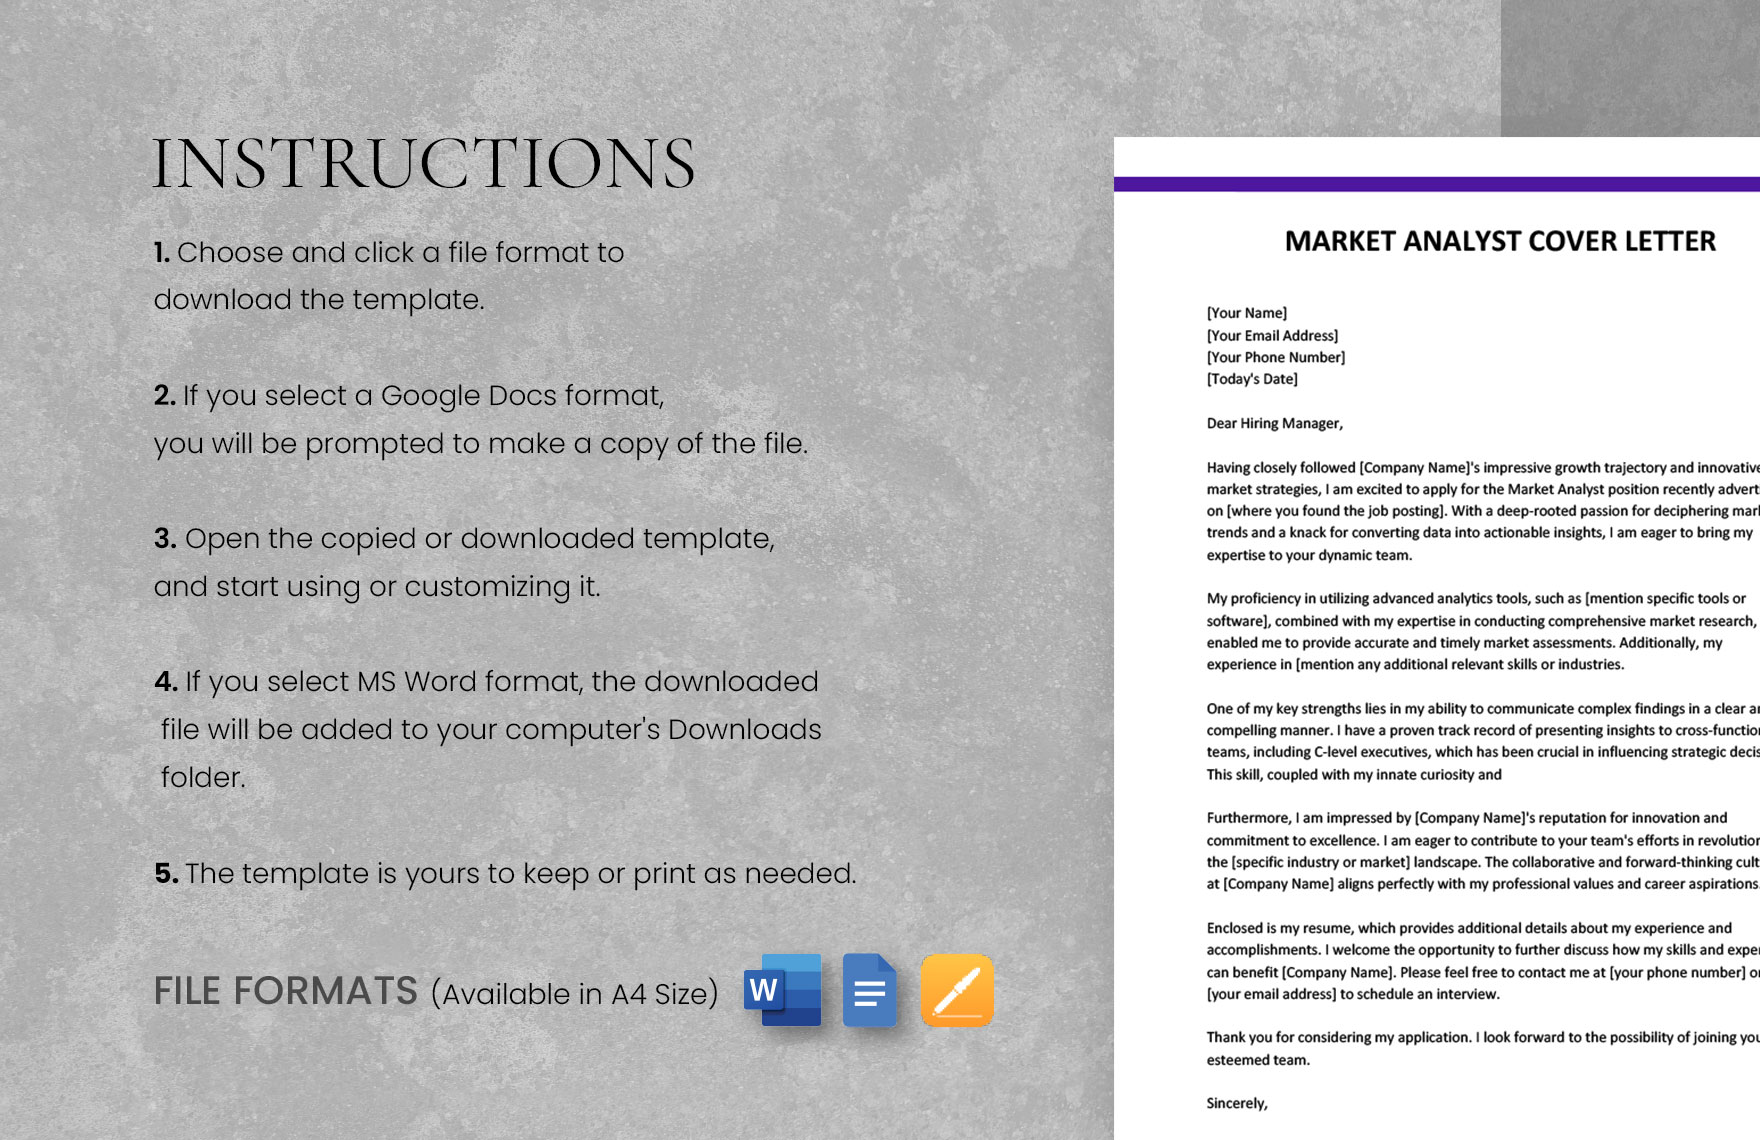 Market Analyst Cover Letter